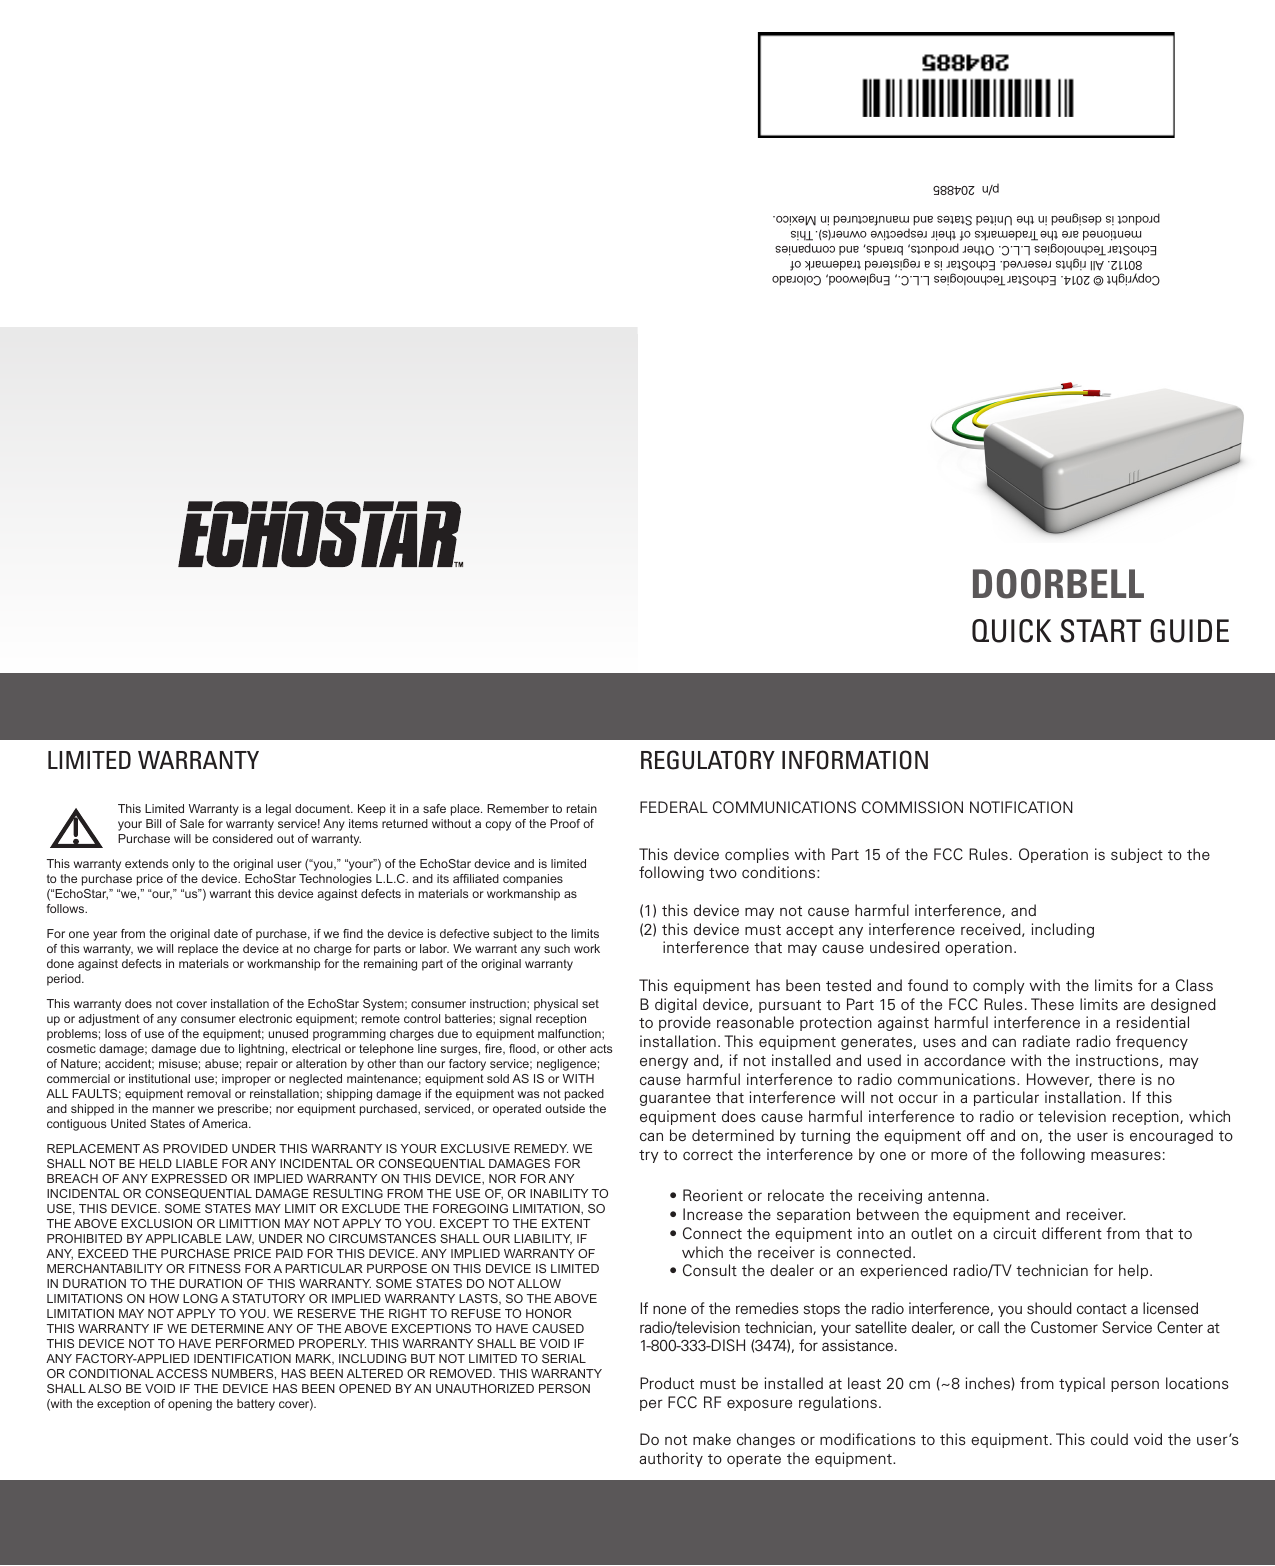  DOORBELL QUICK START GUIDECopyright © 2014. EchoStar Technologies L.L.C., Englewood, Colorado 80112. All rights reserved. EchoStar is a registered trademark of EchoStar Technologies L.L.C. Other products, brands, and companies mentioned are the Trademarks of their respective owner(s). This product is designed in the United States and manufactured in Mexico.   p/n  204885REGULATORY INFORMATIONFEDERAL COMMUNICATIONS COMMISSION NOTIFICATIONThis device complies with Part 15 of the FCC Rules. Operation is subject to the following two conditions: (1) this device may not cause harmful interference, and (2)  this device must accept any interference received, including     interference that may cause undesired operation.  This equipment has been tested and found to comply with the limits for a Class B digital device, pursuant to Part 15 of the FCC Rules. These limits are designed to provide reasonable protection against harmful interference in a residential installation. This equipment generates, uses and can radiate radio frequency energy and, if not installed and used in accordance with the instructions, may cause harmful interference to radio communications. However, there is no guarantee that interference will not occur in a particular installation. If this equipment does cause harmful interference to radio or television reception, which can be determined by turning the equipment off and on, the user is encouraged to try to correct the interference by one or more of the following measures:• Reorient or relocate the receiving antenna.• Increase the separation between the equipment and receiver.•  Connect the equipment into an outlet on a circuit different from that to which the receiver is connected.•  Consult the dealer or an experienced radio/TV technician for help.If none of the remedies stops the radio interference, you should contact a licensed radio/television technician, your satellite dealer, or call the Customer Service Center at 1-800-333-DISH (3474), for assistance.Product must be installed at least 20 cm (~8 inches) from typical person locations per FCC RF exposure regulations.Do not make changes or modiﬁcations to this equipment. This could void the user’s authority to operate the equipment.This Limited Warranty is a legal document. Keep it in a safe place. Remember to retain your Bill of Sale for warranty service! Any items returned without a copy of the Proof of Purchase will be considered out of warranty.This warranty extends only to the original user (“you,” “your”) of the EchoStar device and is limited to the purchase price of the device. EchoStar Technologies L.L.C. and its afliated companies (“EchoStar,” “we,” “our,” “us”) warrant this device against defects in materials or workmanship as follows.For one year from the original date of purchase, if we nd the device is defective subject to the limits of this warranty, we will replace the device at no charge for parts or labor. We warrant any such work done against defects in materials or workmanship for the remaining part of the original warranty period.This warranty does not cover installation of the EchoStar System; consumer instruction; physical set up or adjustment of any consumer electronic equipment; remote control batteries; signal reception problems; loss of use of the equipment; unused programming charges due to equipment malfunction; cosmetic damage; damage due to lightning, electrical or telephone line surges, re, ood, or other acts of Nature; accident; misuse; abuse; repair or alteration by other than our factory service; negligence; commercial or institutional use; improper or neglected maintenance; equipment sold AS IS or WITH ALL FAULTS; equipment removal or reinstallation; shipping damage if the equipment was not packed and shipped in the manner we prescribe; nor equipment purchased, serviced, or operated outside the contiguous United States of America.REPLACEMENT AS PROVIDED UNDER THIS WARRANTY IS YOUR EXCLUSIVE REMEDY. WE SHALL NOT BE HELD LIABLE FOR ANY INCIDENTAL OR CONSEQUENTIAL DAMAGES FOR BREACH OF ANY EXPRESSED OR IMPLIED WARRANTY ON THIS DEVICE, NOR FOR ANY INCIDENTAL OR CONSEQUENTIAL DAMAGE RESULTING FROM THE USE OF, OR INABILITY TO USE, THIS DEVICE. SOME STATES MAY LIMIT OR EXCLUDE THE FOREGOING LIMITATION, SO THE ABOVE EXCLUSION OR LIMITTION MAY NOT APPLY TO YOU. EXCEPT TO THE EXTENT PROHIBITED BY APPLICABLE LAW, UNDER NO CIRCUMSTANCES SHALL OUR LIABILITY, IF ANY, EXCEED THE PURCHASE PRICE PAID FOR THIS DEVICE. ANY IMPLIED WARRANTY OF MERCHANTABILITY OR FITNESS FOR A PARTICULAR PURPOSE ON THIS DEVICE IS LIMITED IN DURATION TO THE DURATION OF THIS WARRANTY. SOME STATES DO NOT ALLOW LIMITATIONS ON HOW LONG A STATUTORY OR IMPLIED WARRANTY LASTS, SO THE ABOVE LIMITATION MAY NOT APPLY TO YOU. WE RESERVE THE RIGHT TO REFUSE TO HONOR THIS WARRANTY IF WE DETERMINE ANY OF THE ABOVE EXCEPTIONS TO HAVE CAUSED THIS DEVICE NOT TO HAVE PERFORMED PROPERLY. THIS WARRANTY SHALL BE VOID IF ANY FACTORY-APPLIED IDENTIFICATION MARK, INCLUDING BUT NOT LIMITED TO SERIAL OR CONDITIONAL ACCESS NUMBERS, HAS BEEN ALTERED OR REMOVED. THIS WARRANTY SHALL ALSO BE VOID IF THE DEVICE HAS BEEN OPENED BY AN UNAUTHORIZED PERSON (with the exception of opening the battery cover).LIMITED WARRANTY